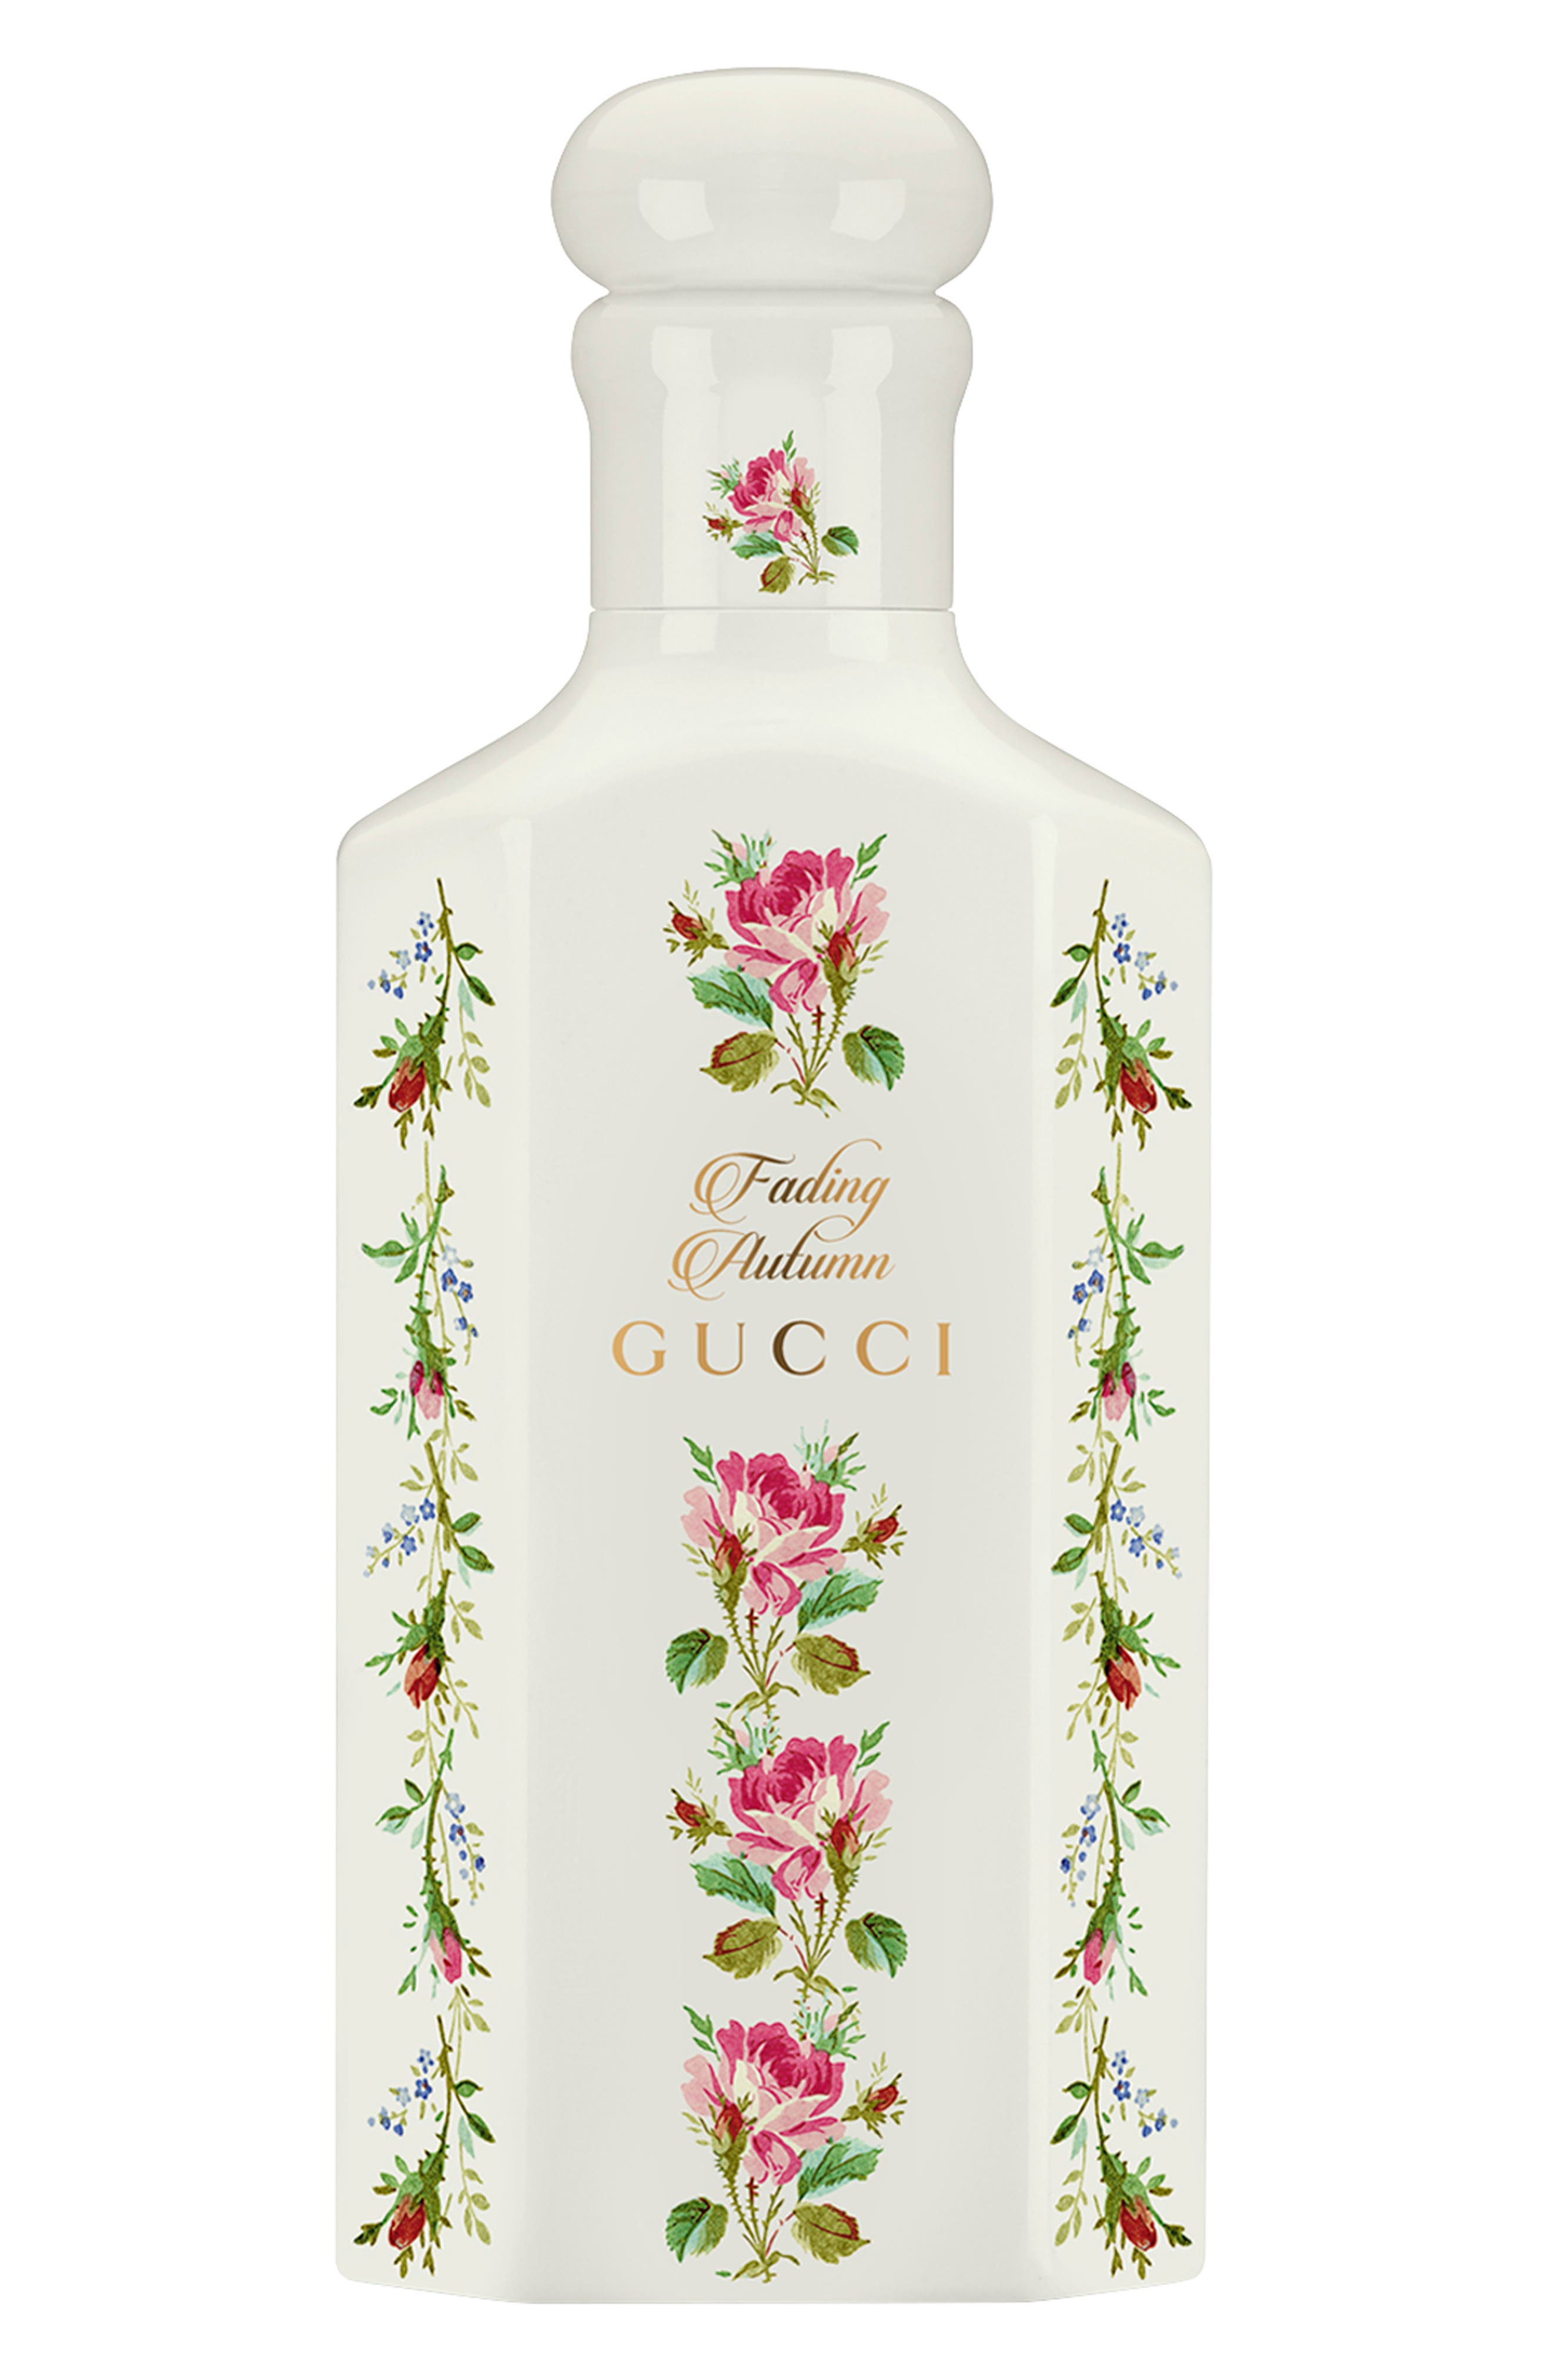 Gucci The Alchemist's Garden Fading Autumn Floral Water at Nordstrom